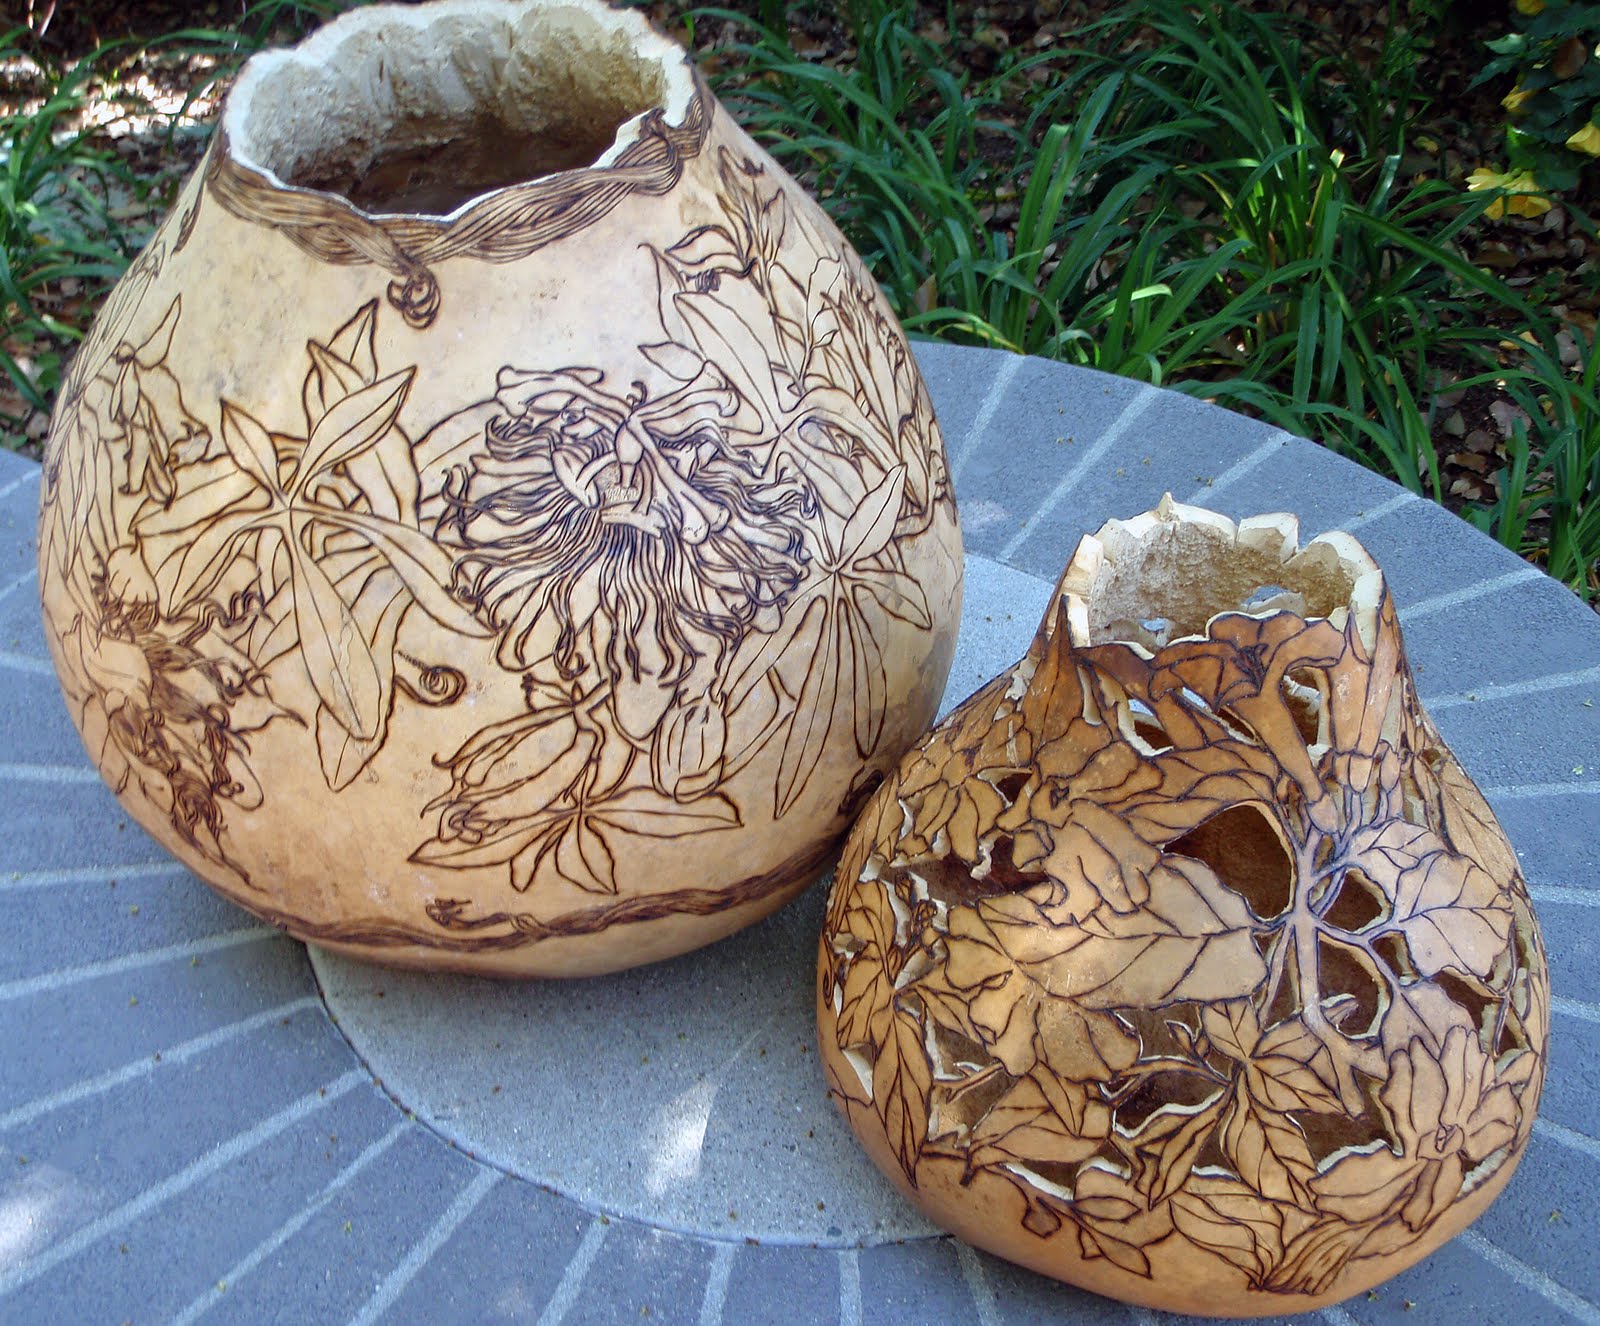  Wood, Woodburning Projects, Artful Gourds, Woodburning Ideas, Gourds